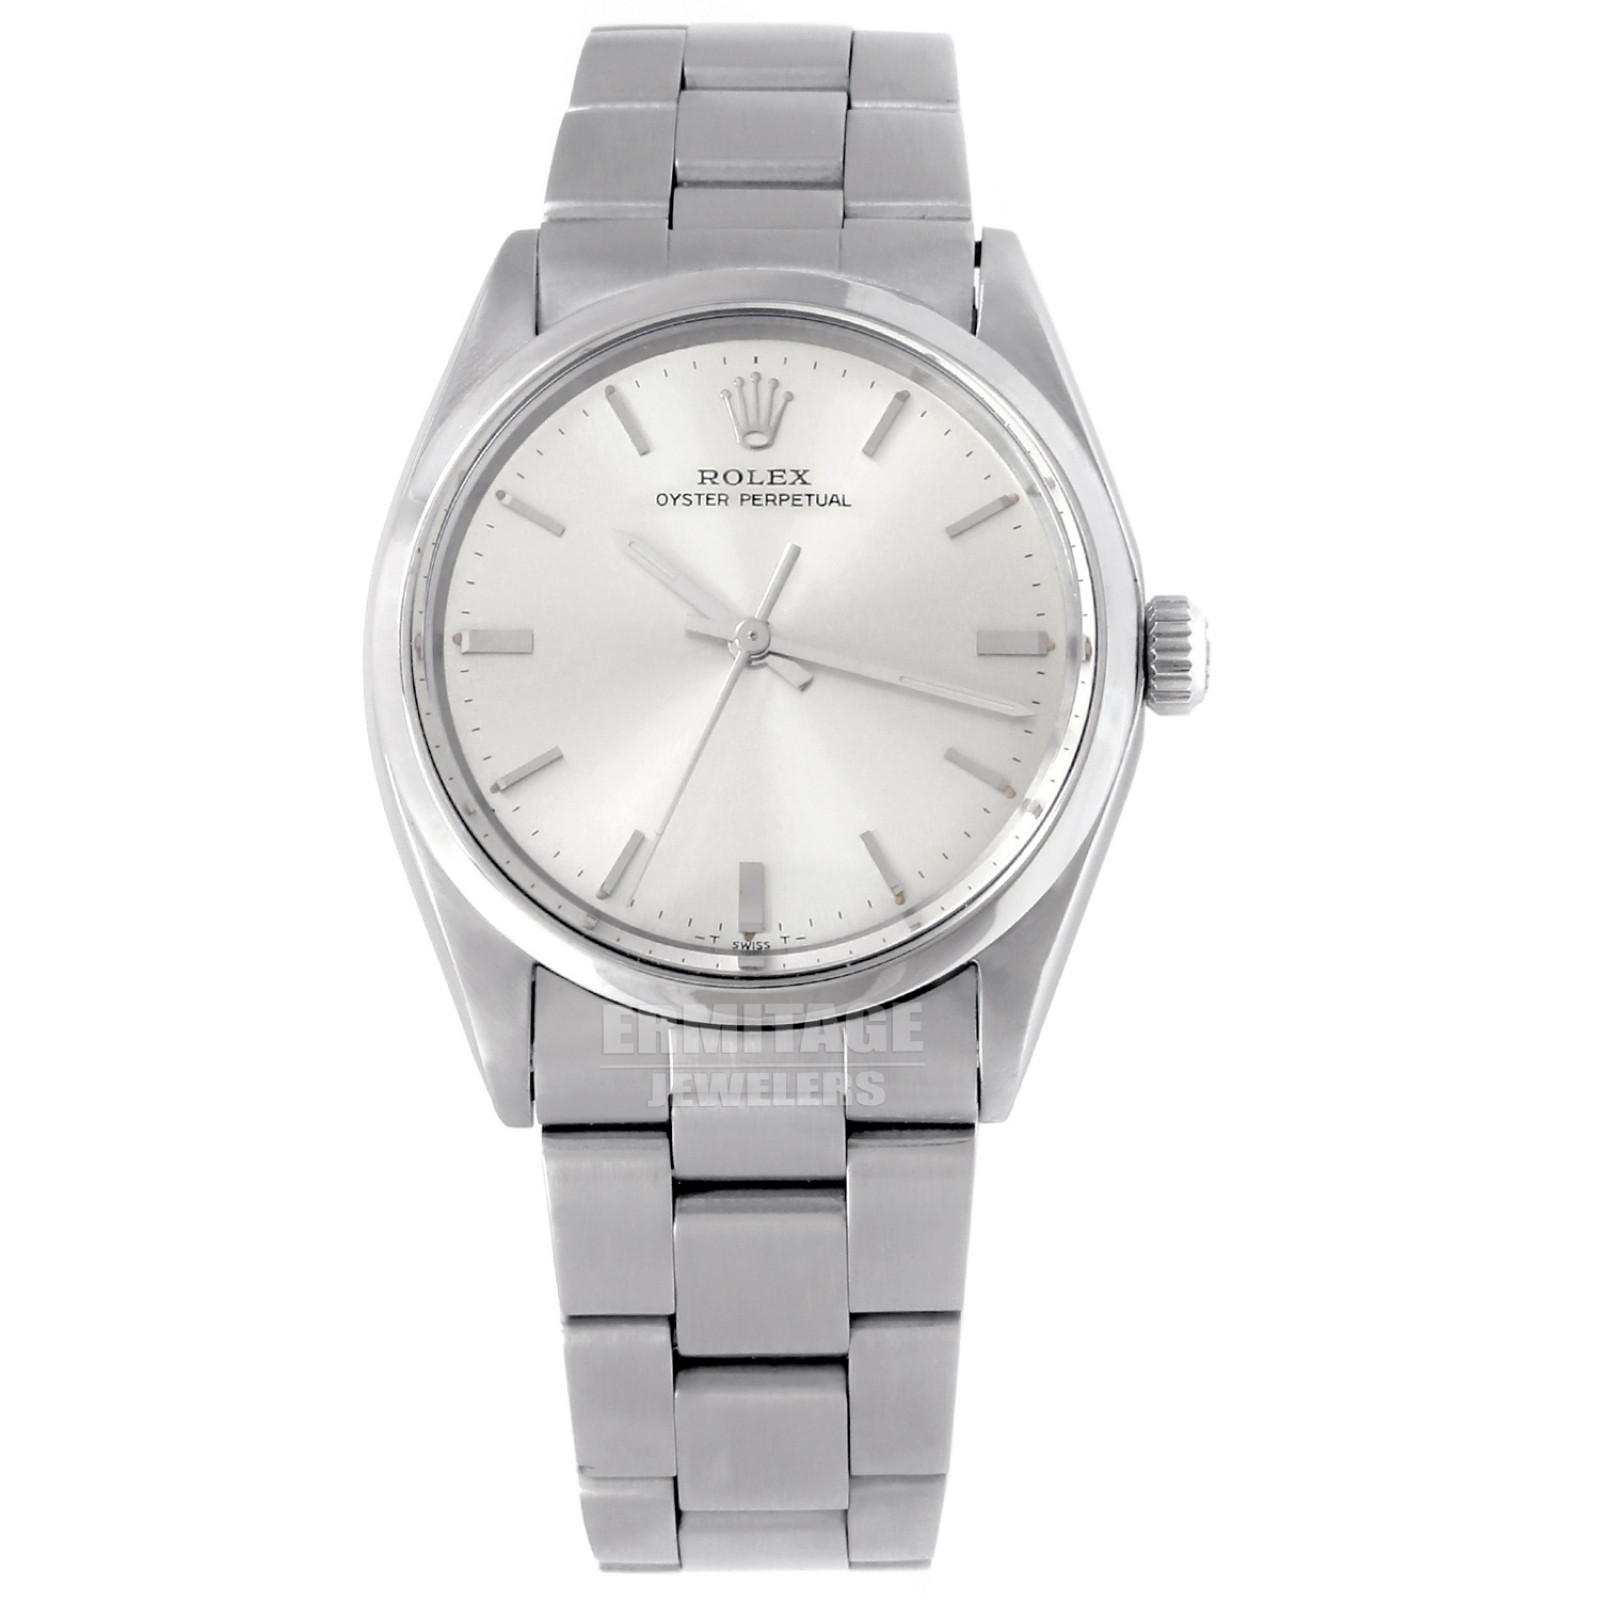 Rolex Women's Oyster Perpetual 5552